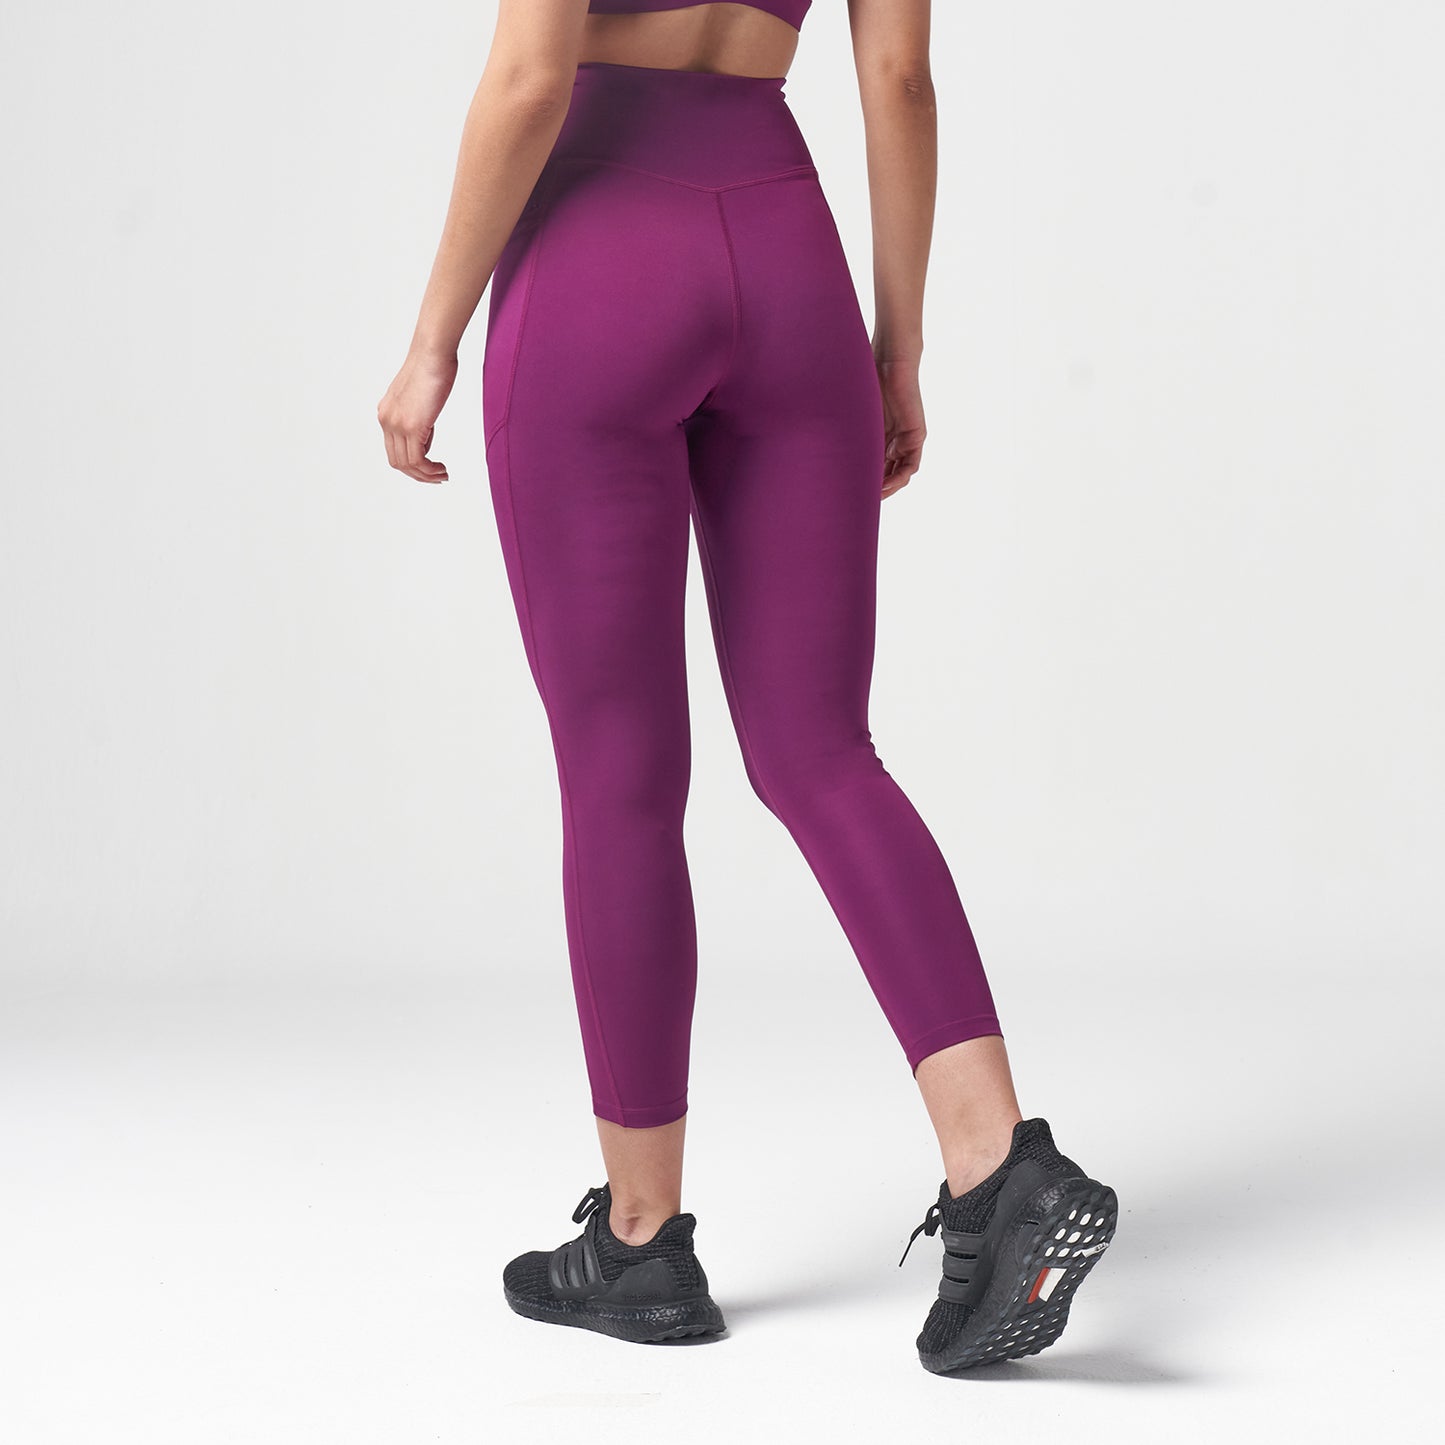 squatwolf-workout-clothes-essential-cropped-leggings-dark-purple-gym-leggings-for-women